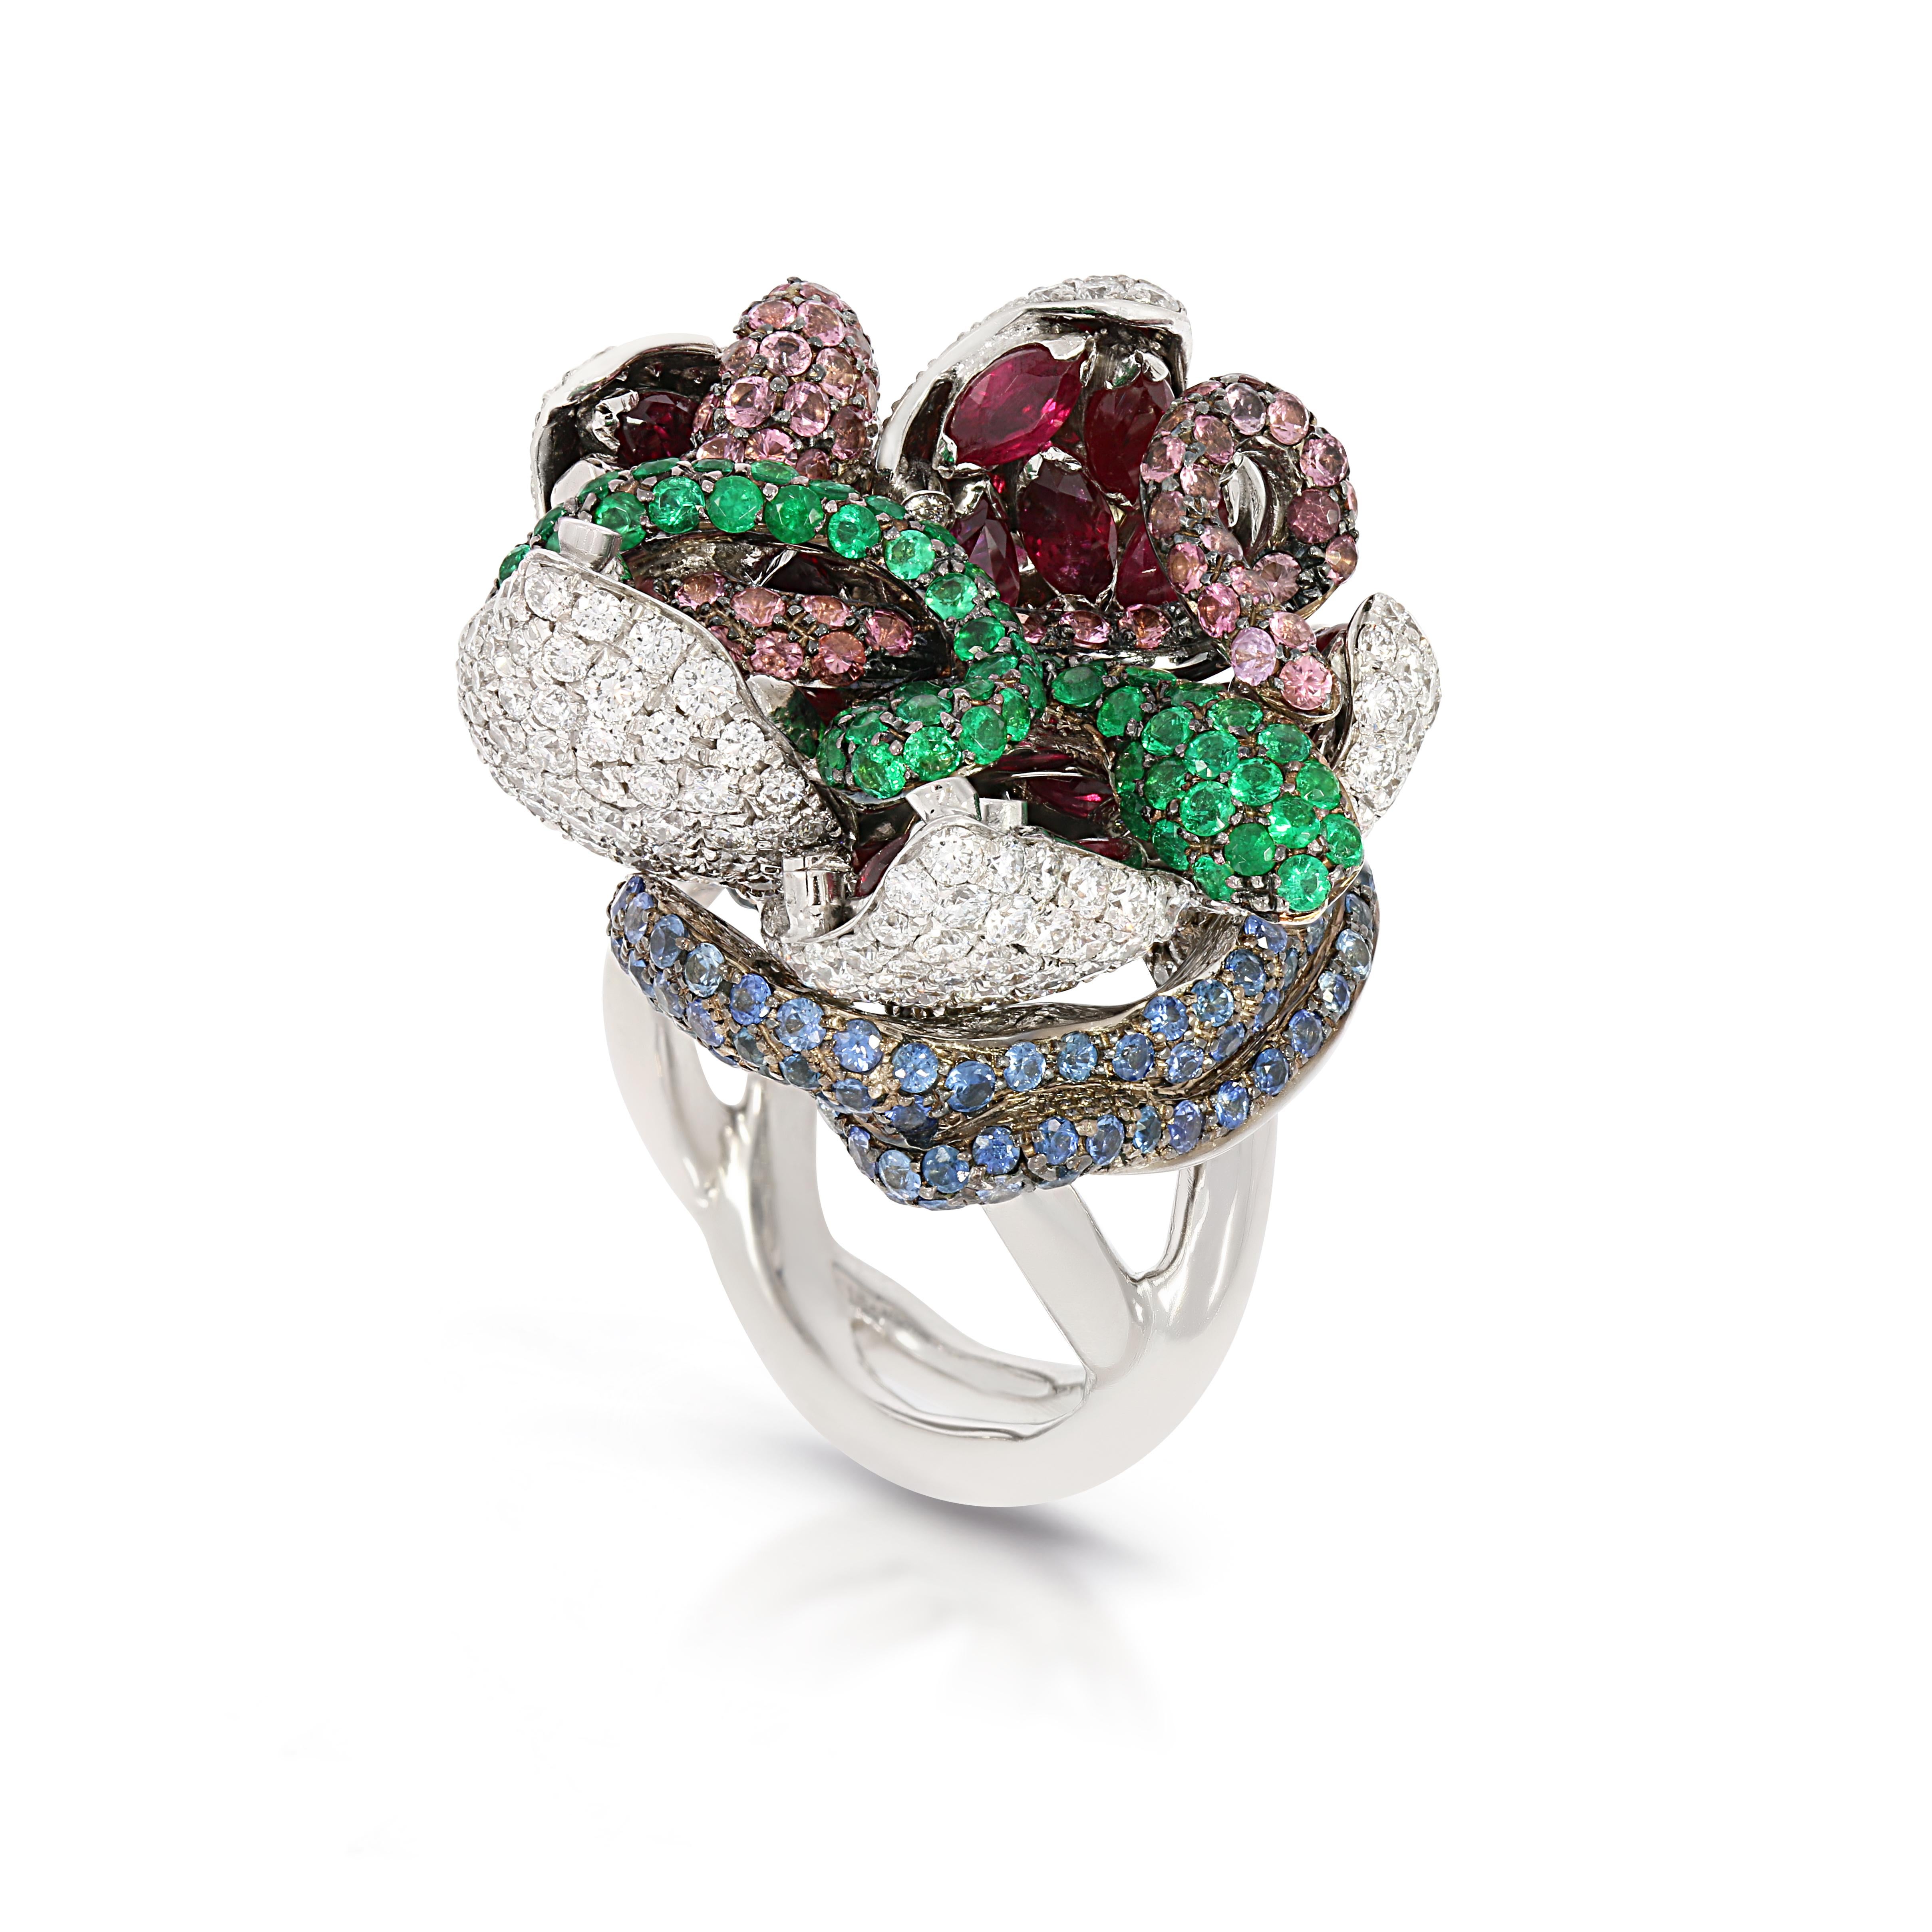 Rosior by Manuel Rosas Contemporary Cocktail Ring made in 19.2 Karat White Gold featuring 3 Serpents around a 5 Petal Flower. The ring is set with:
- 355 F/G-VVS Diamonds with 4,27 ct;
- 58 Emeralds with 0,81 ct;
- 30 